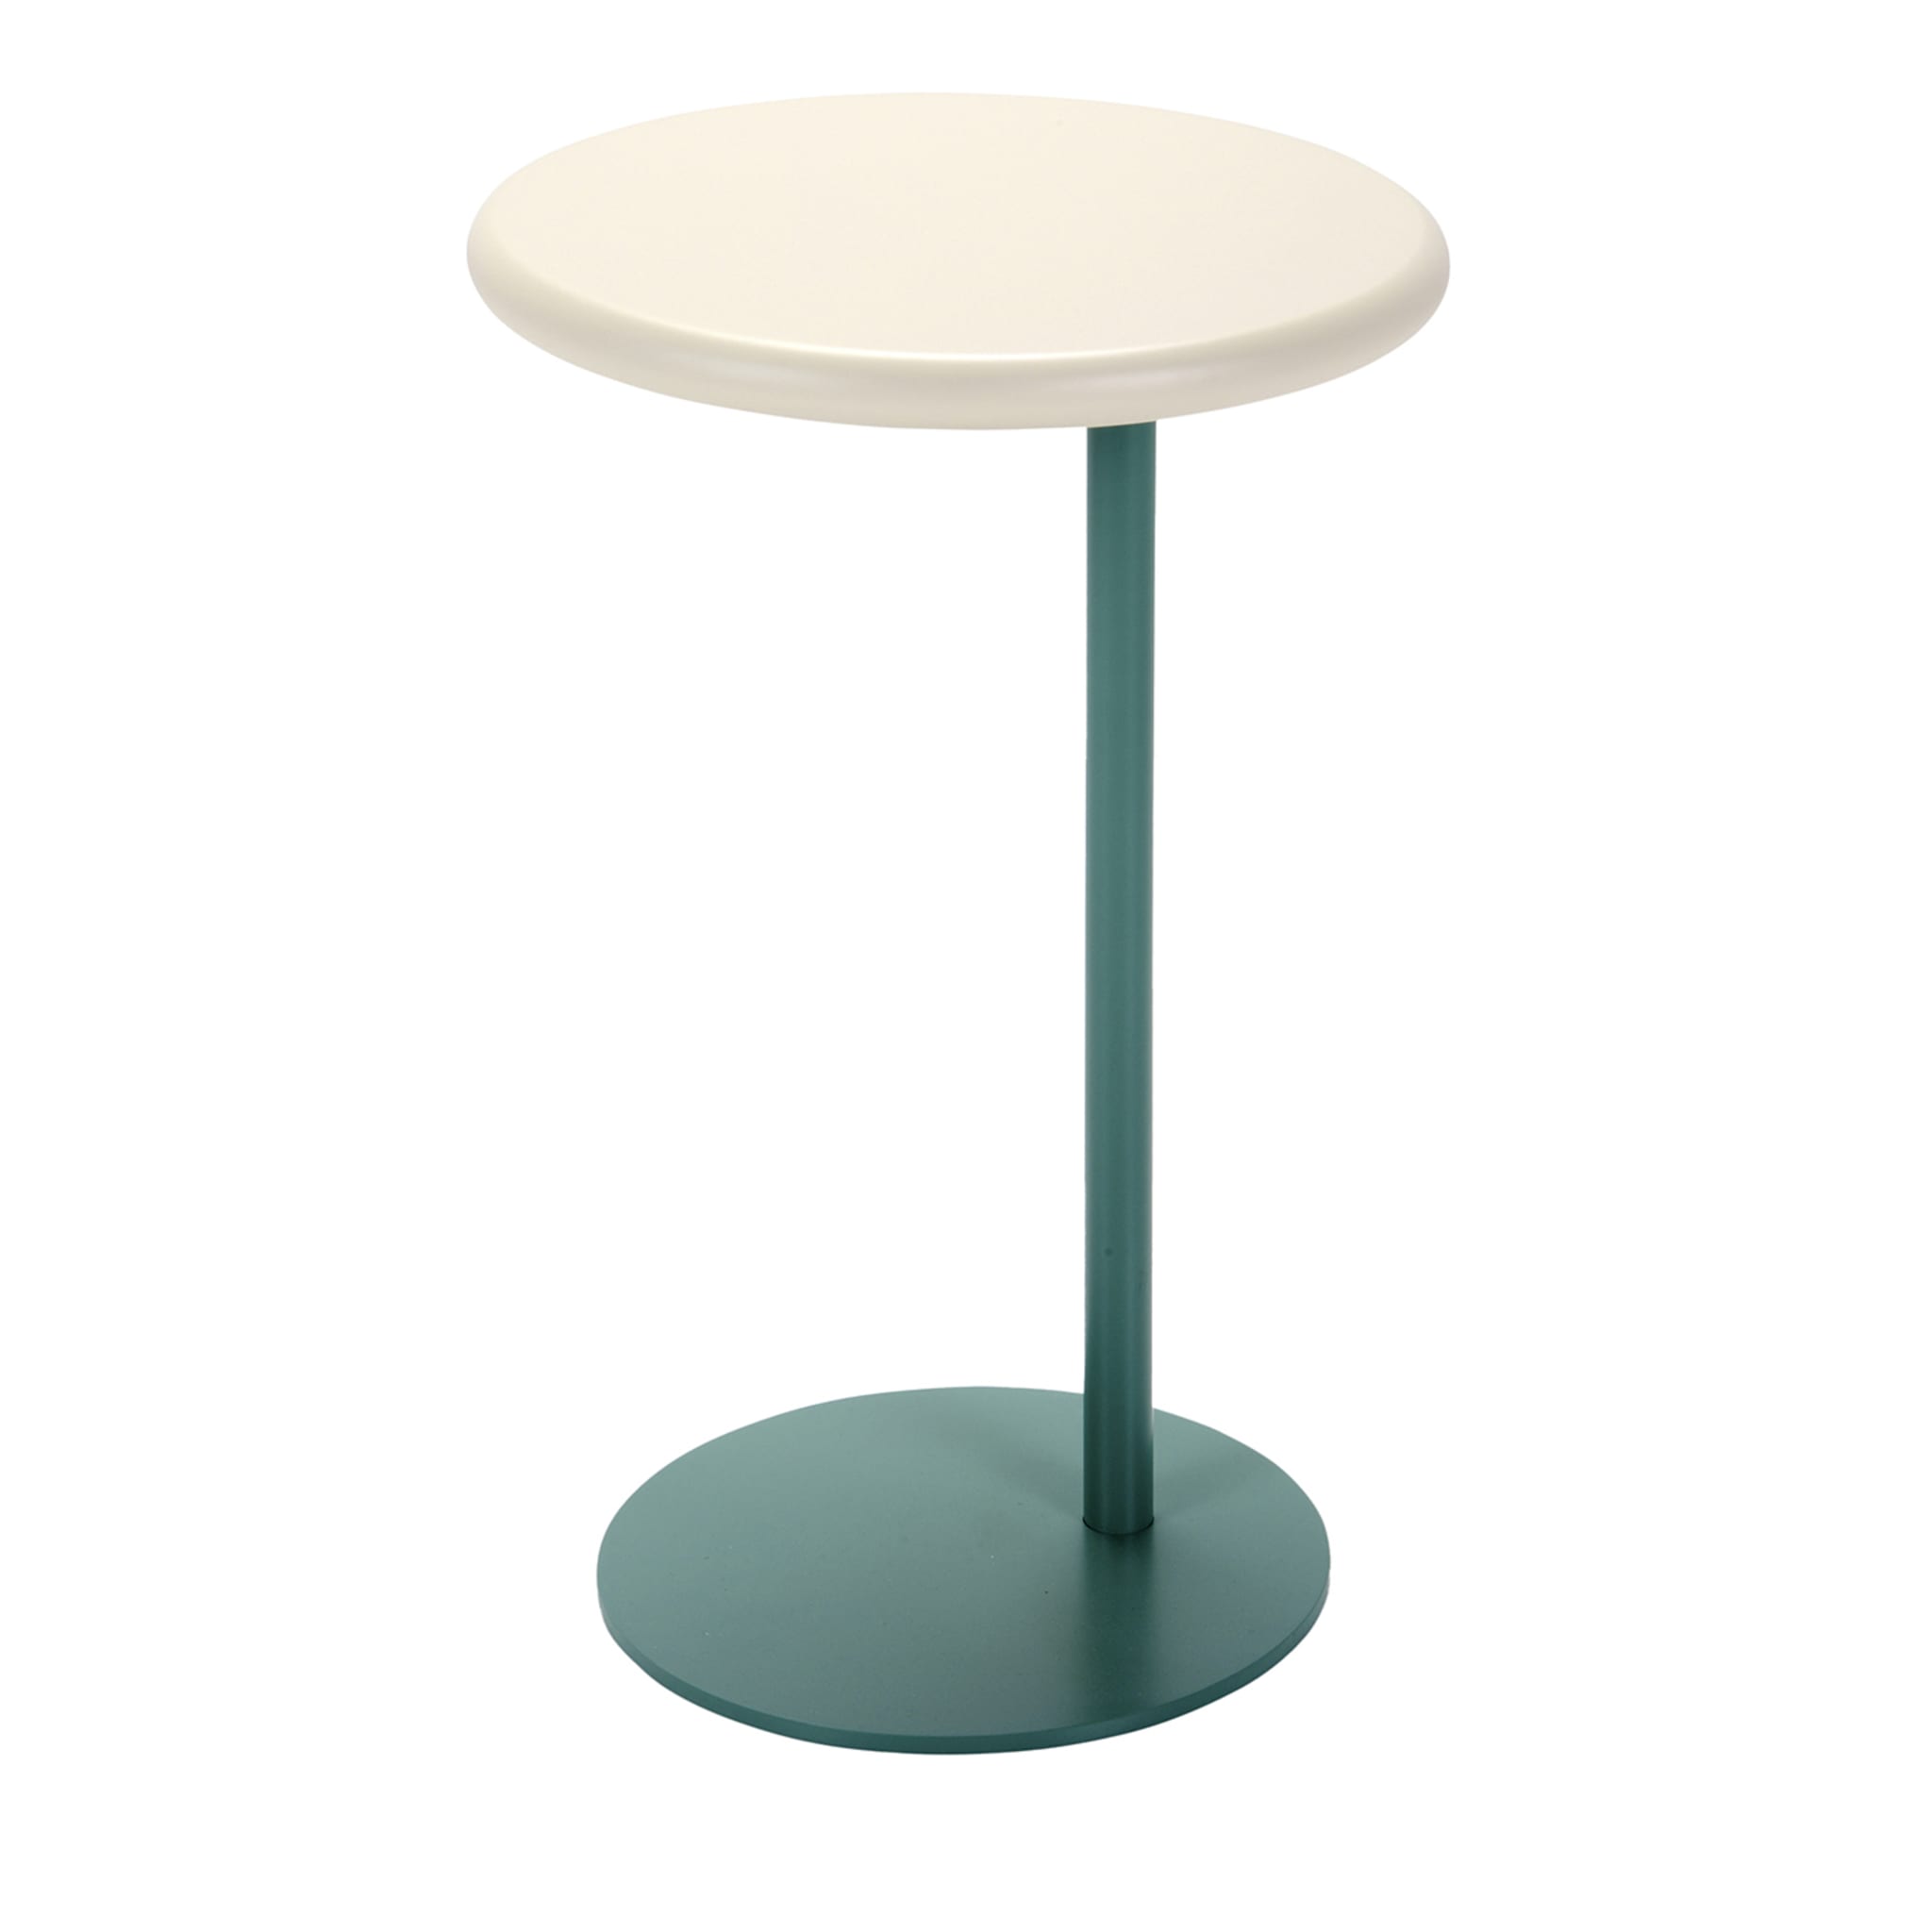 Green and White Biscuit Small Side Table by Kazuko Okamoto - Main view